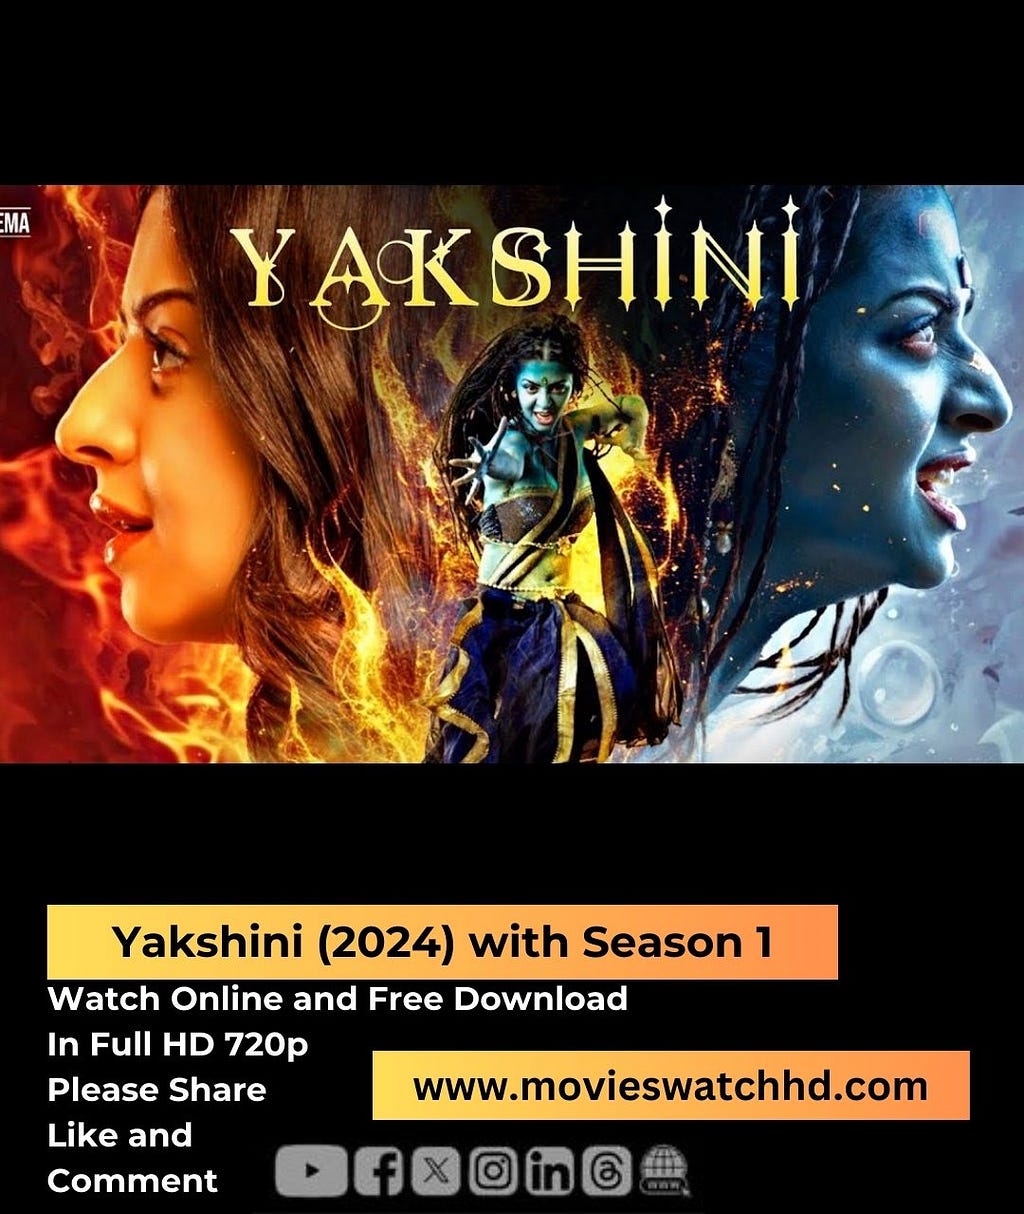 🍿 Get ready to watch Yakshini (2024) with Season 1, including all episodes